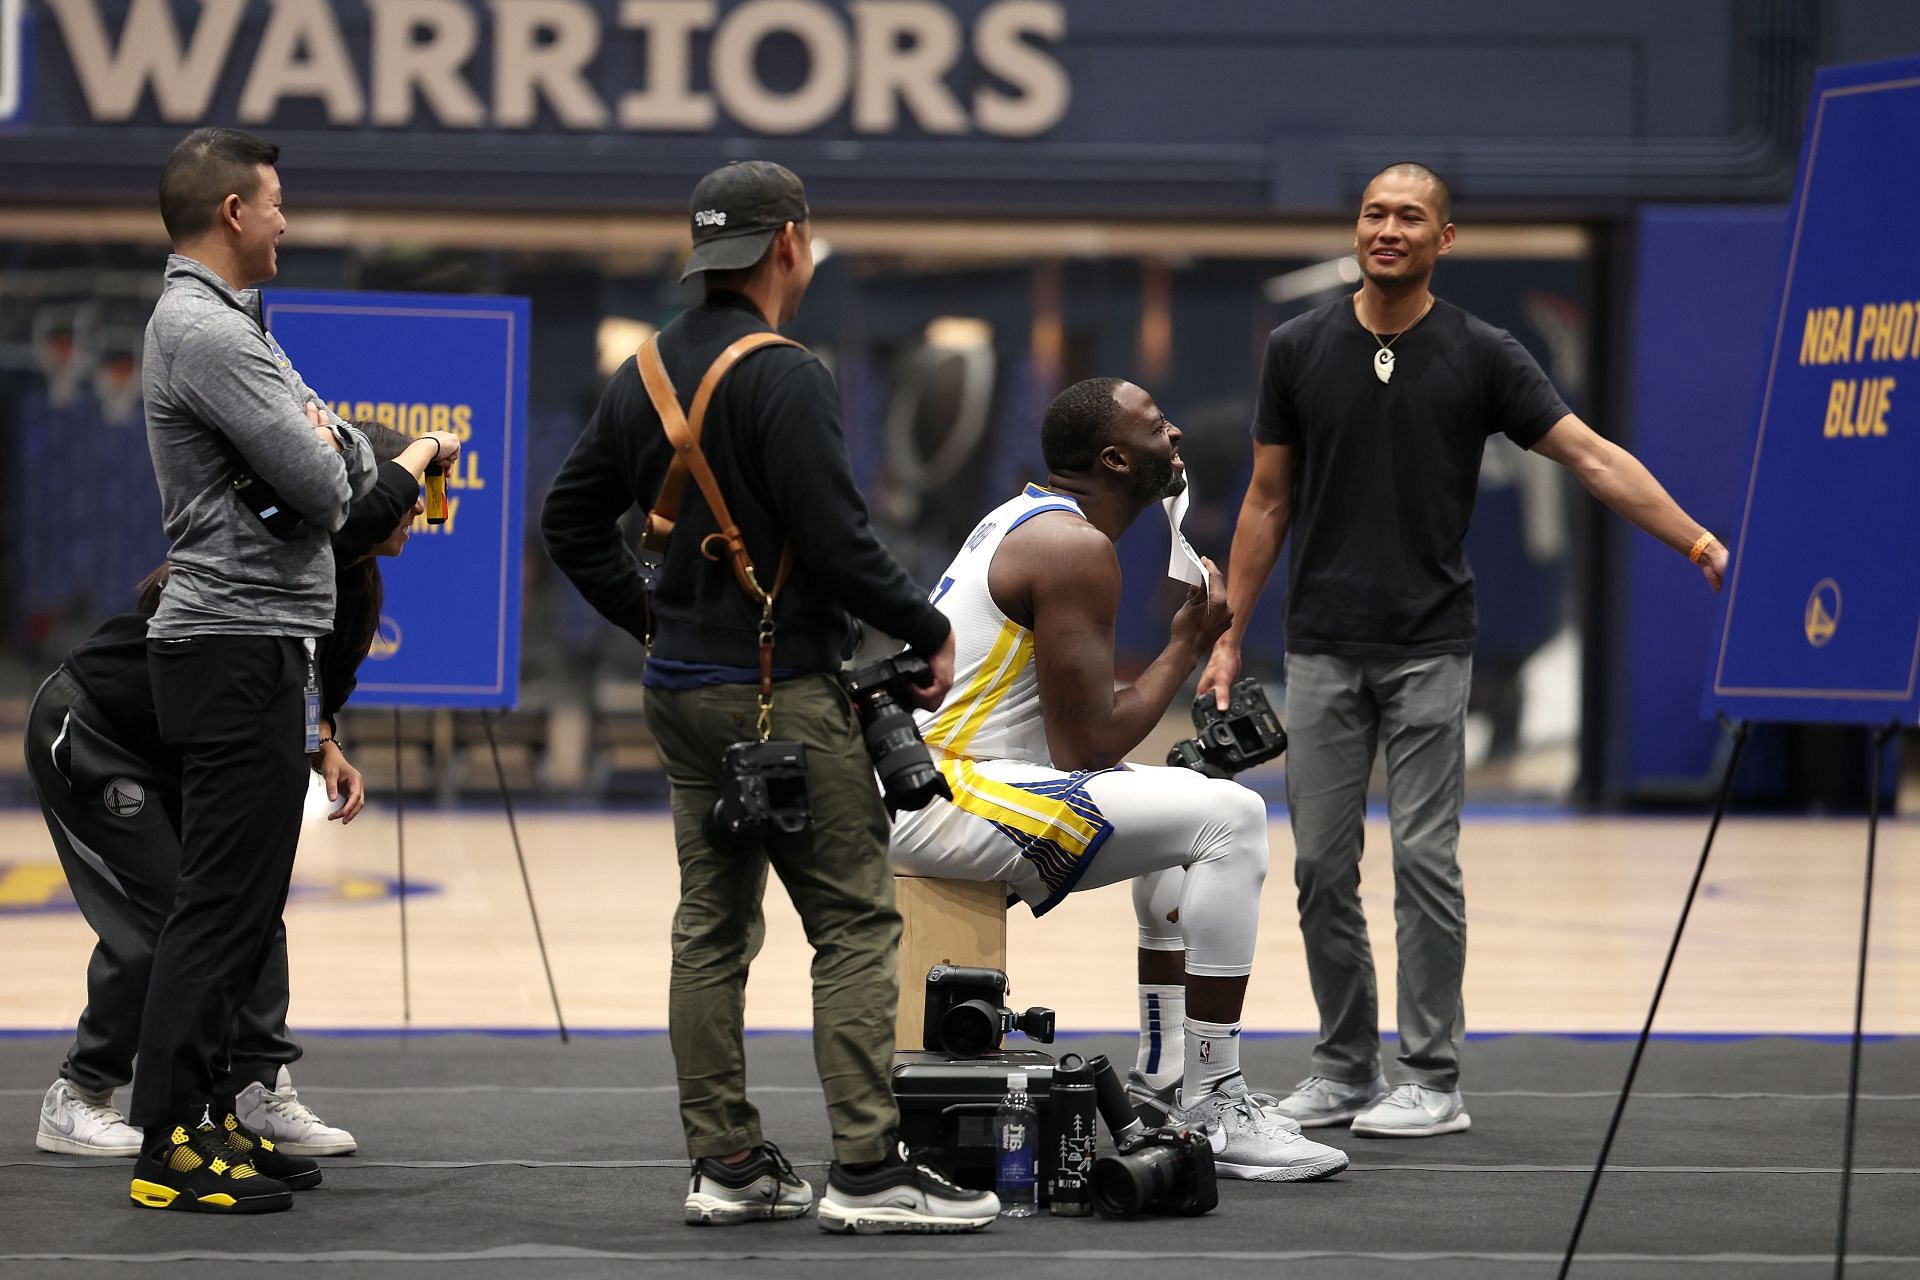 Draymond Green on Golden State Warriors Media Day wearing Nike sneakers